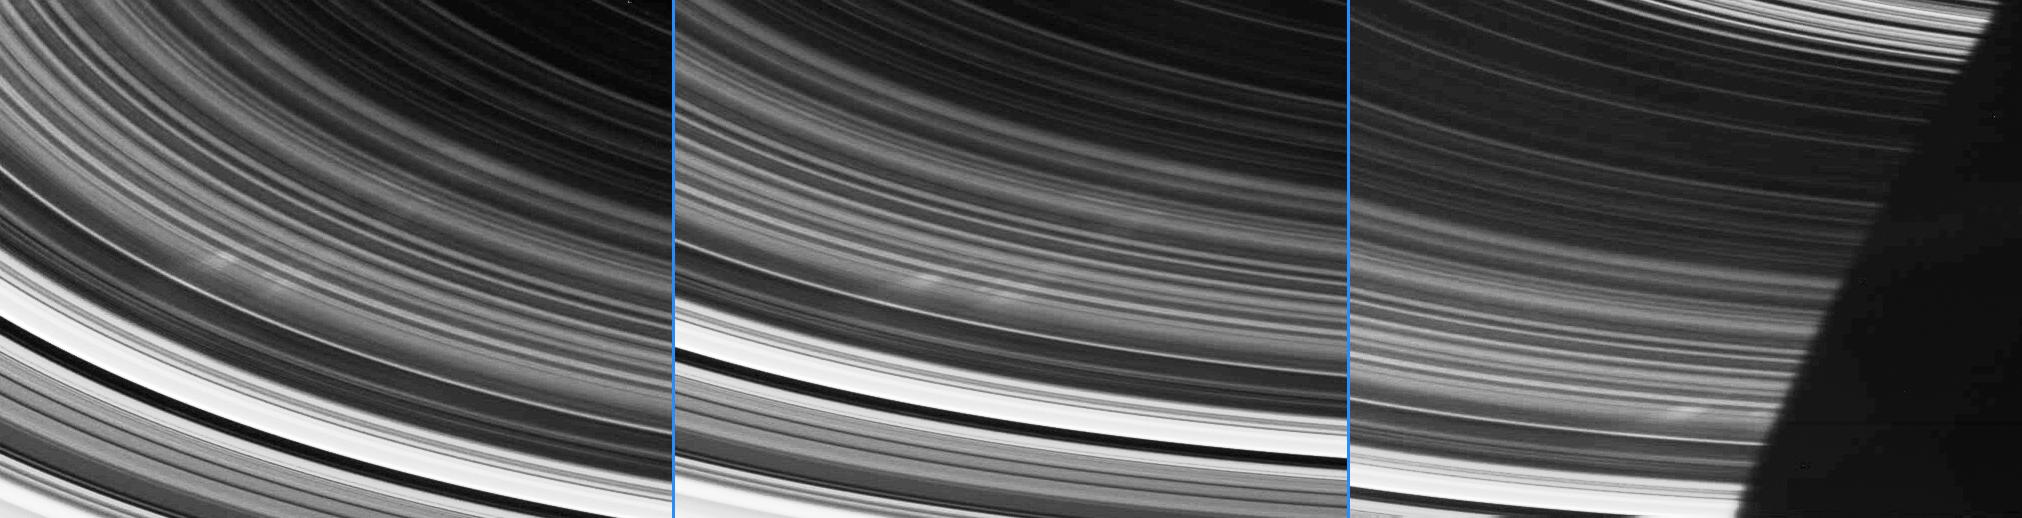 This is an image of the spokes inside Saturn's rings.